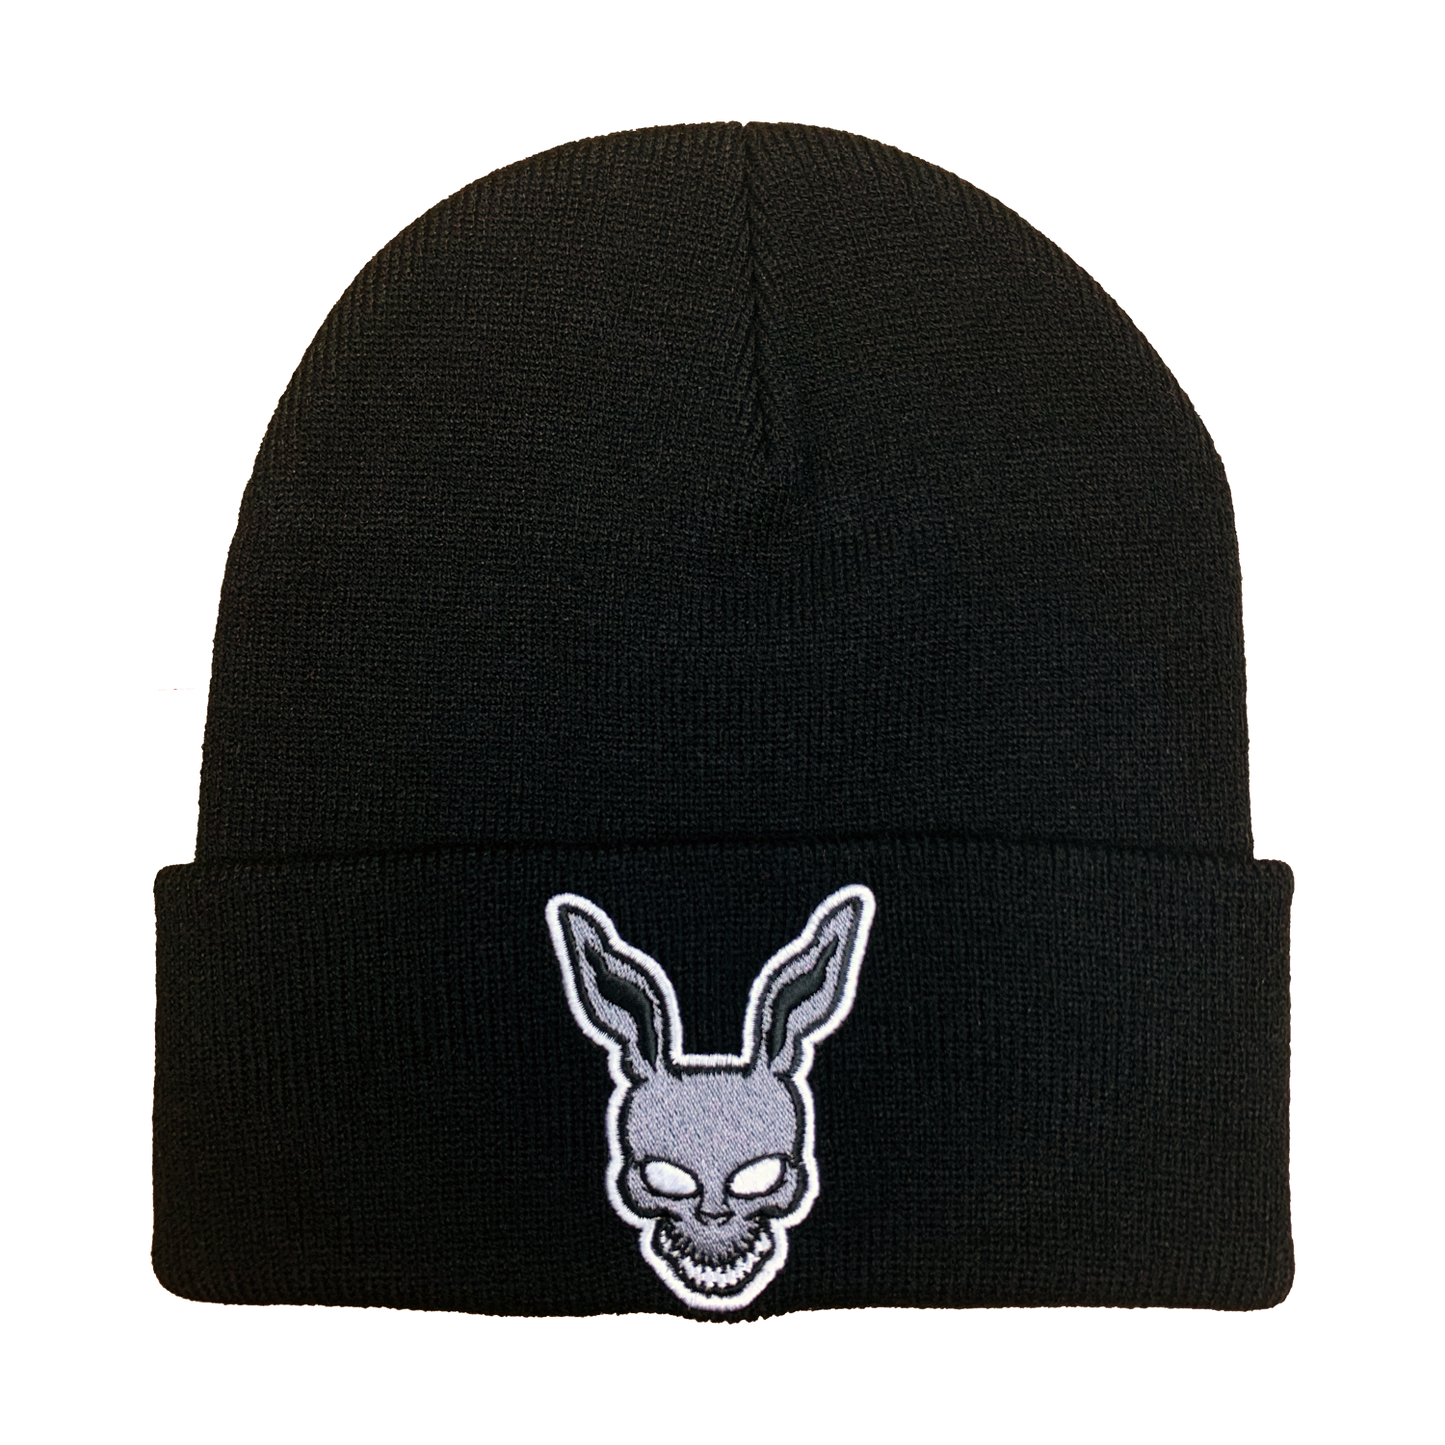 Donnie Darko Embroidered Beanie - UNMASKED Horror & Punk Patches and Decor